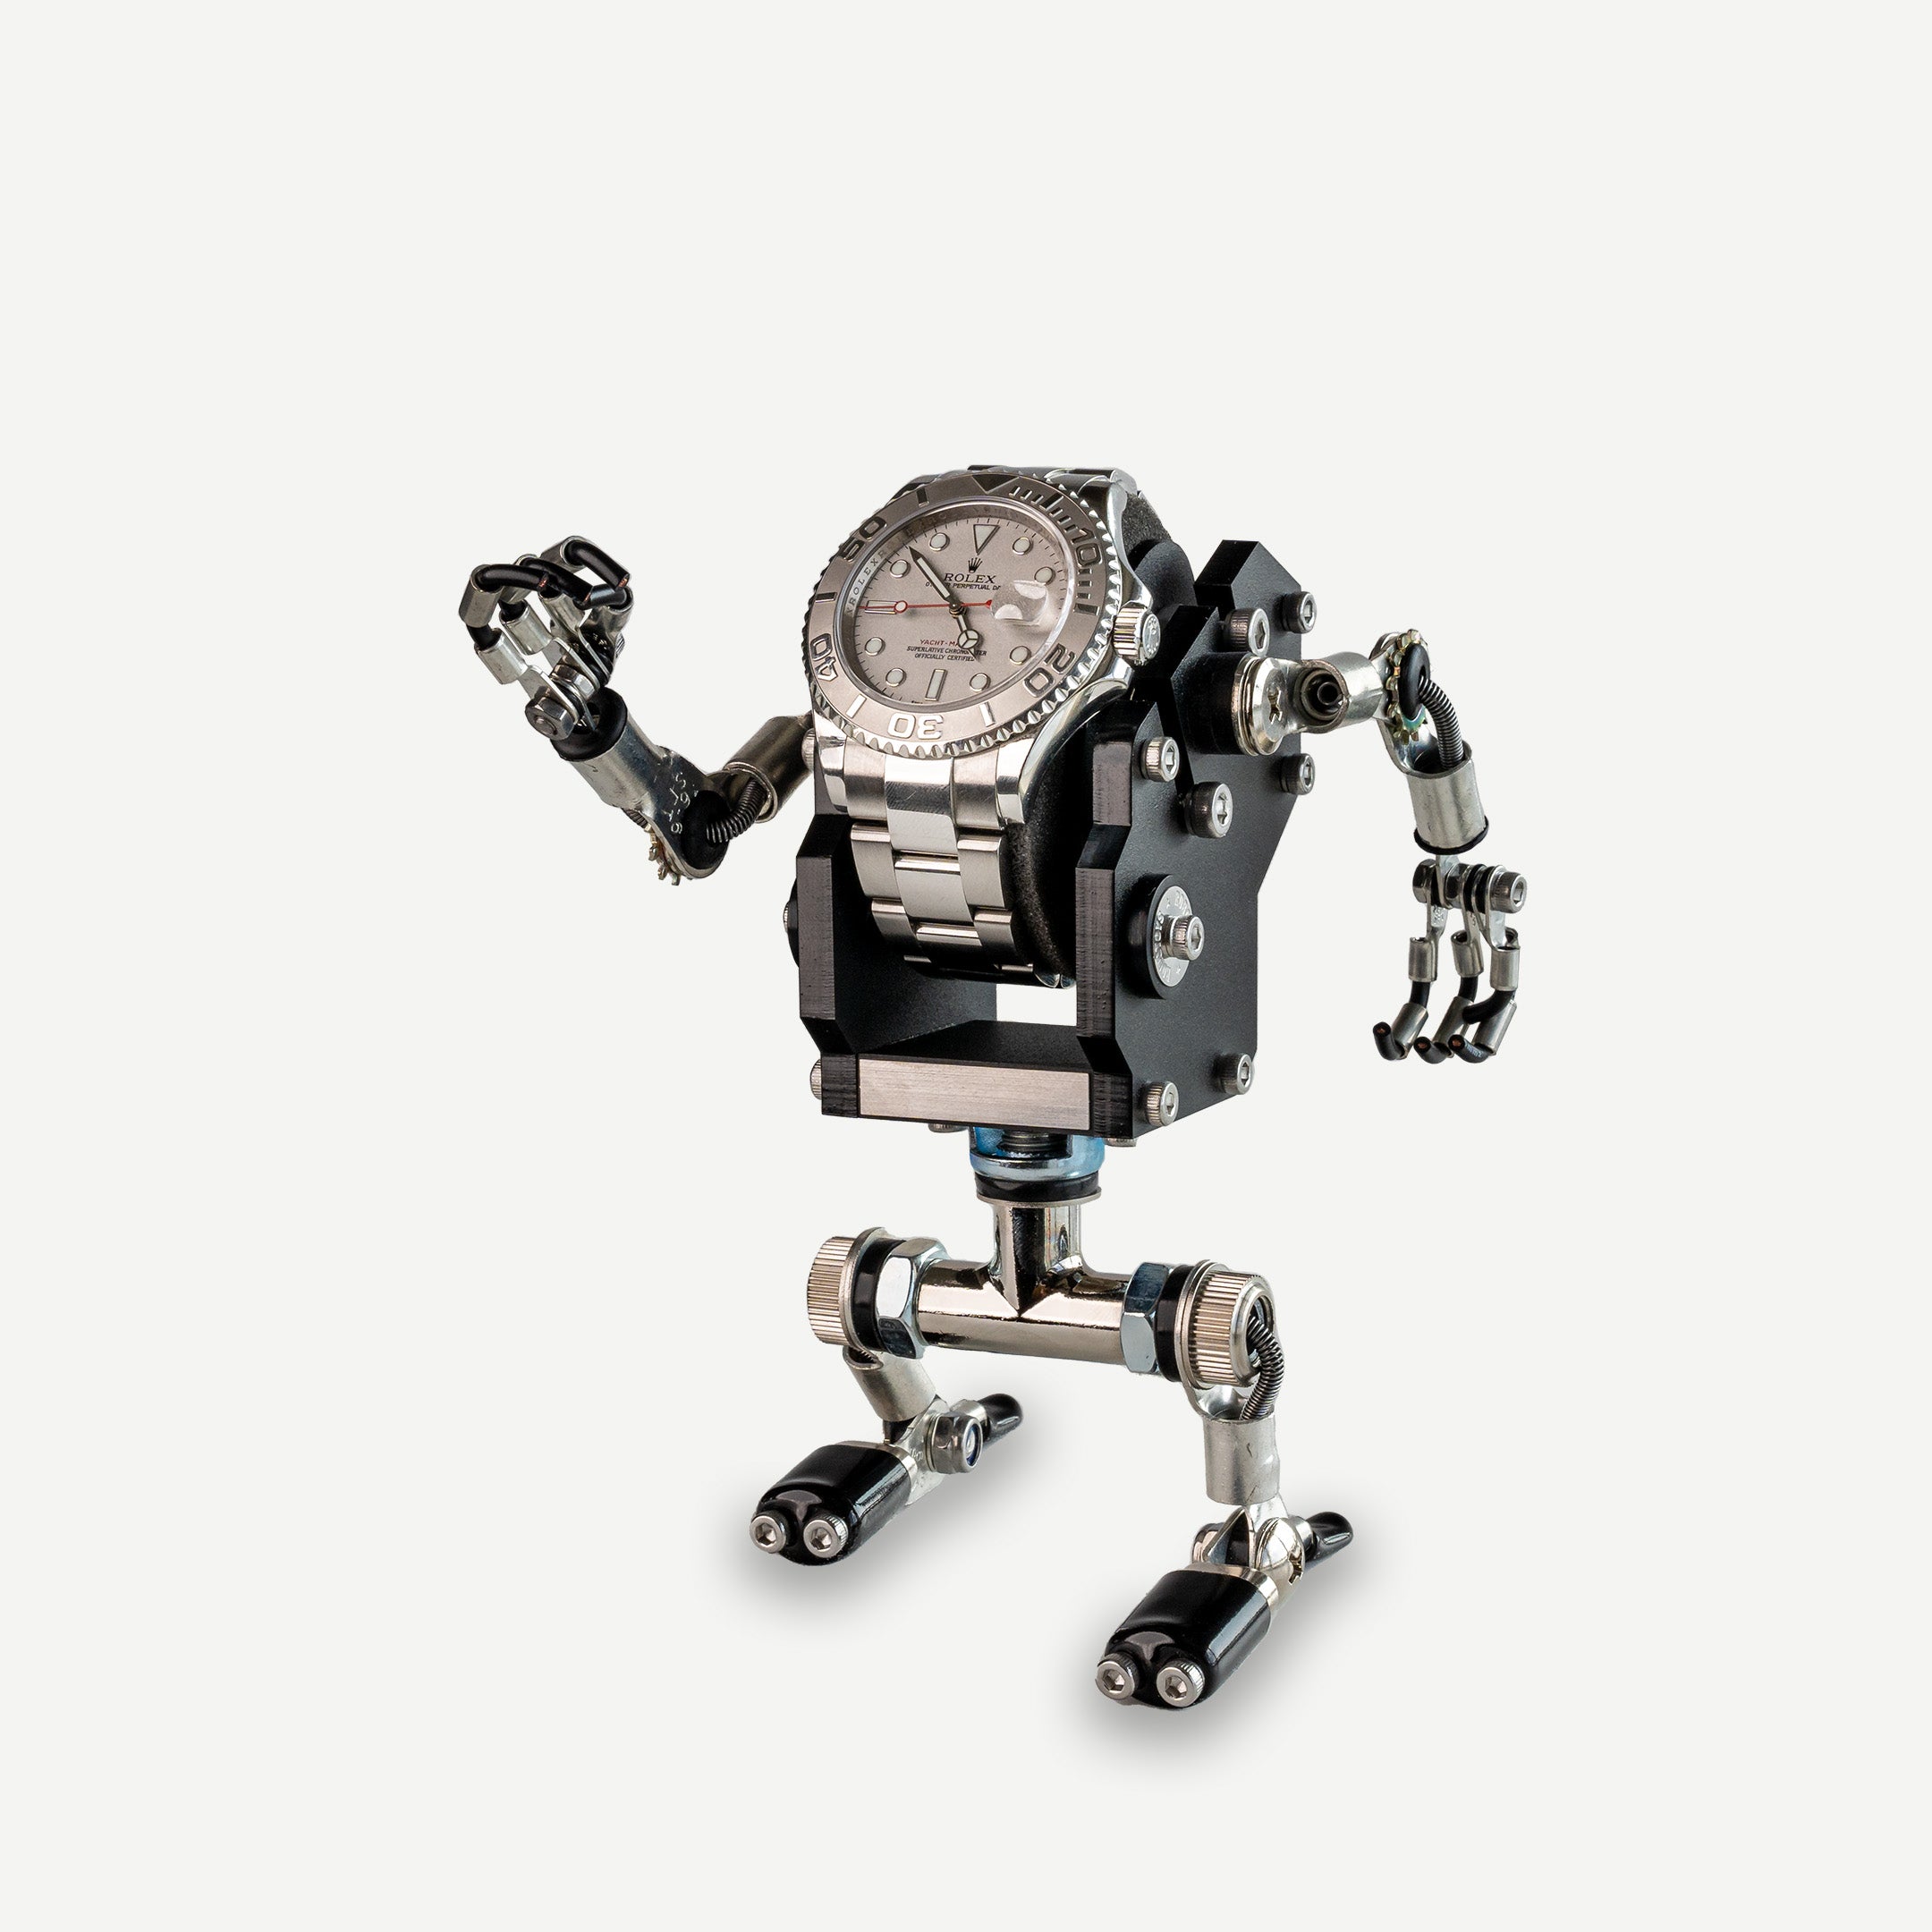 Robot Watch Stand “Mike”